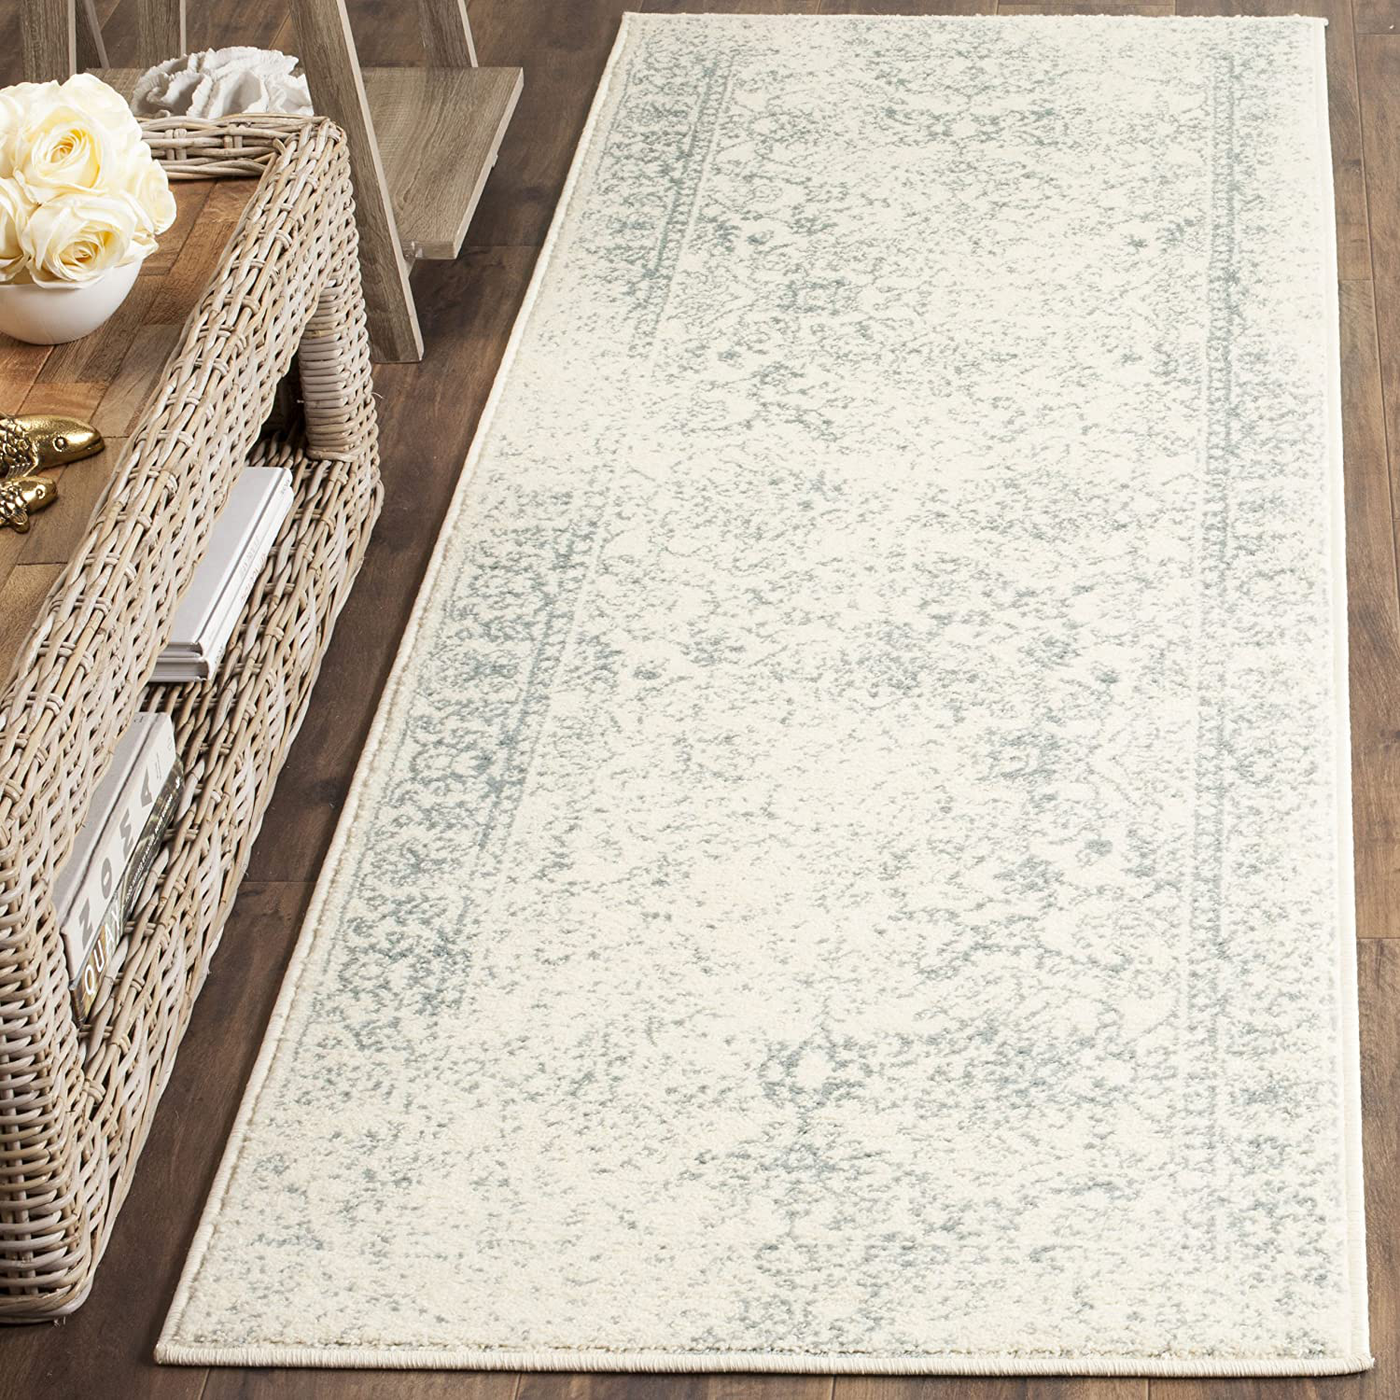 Safavieh Adirondack Collection ADR109S Oriental Distressed Non-Shedding Stain Resistant Living Room Bedroom Runner, 2'6" x 14' , Ivory / Slate